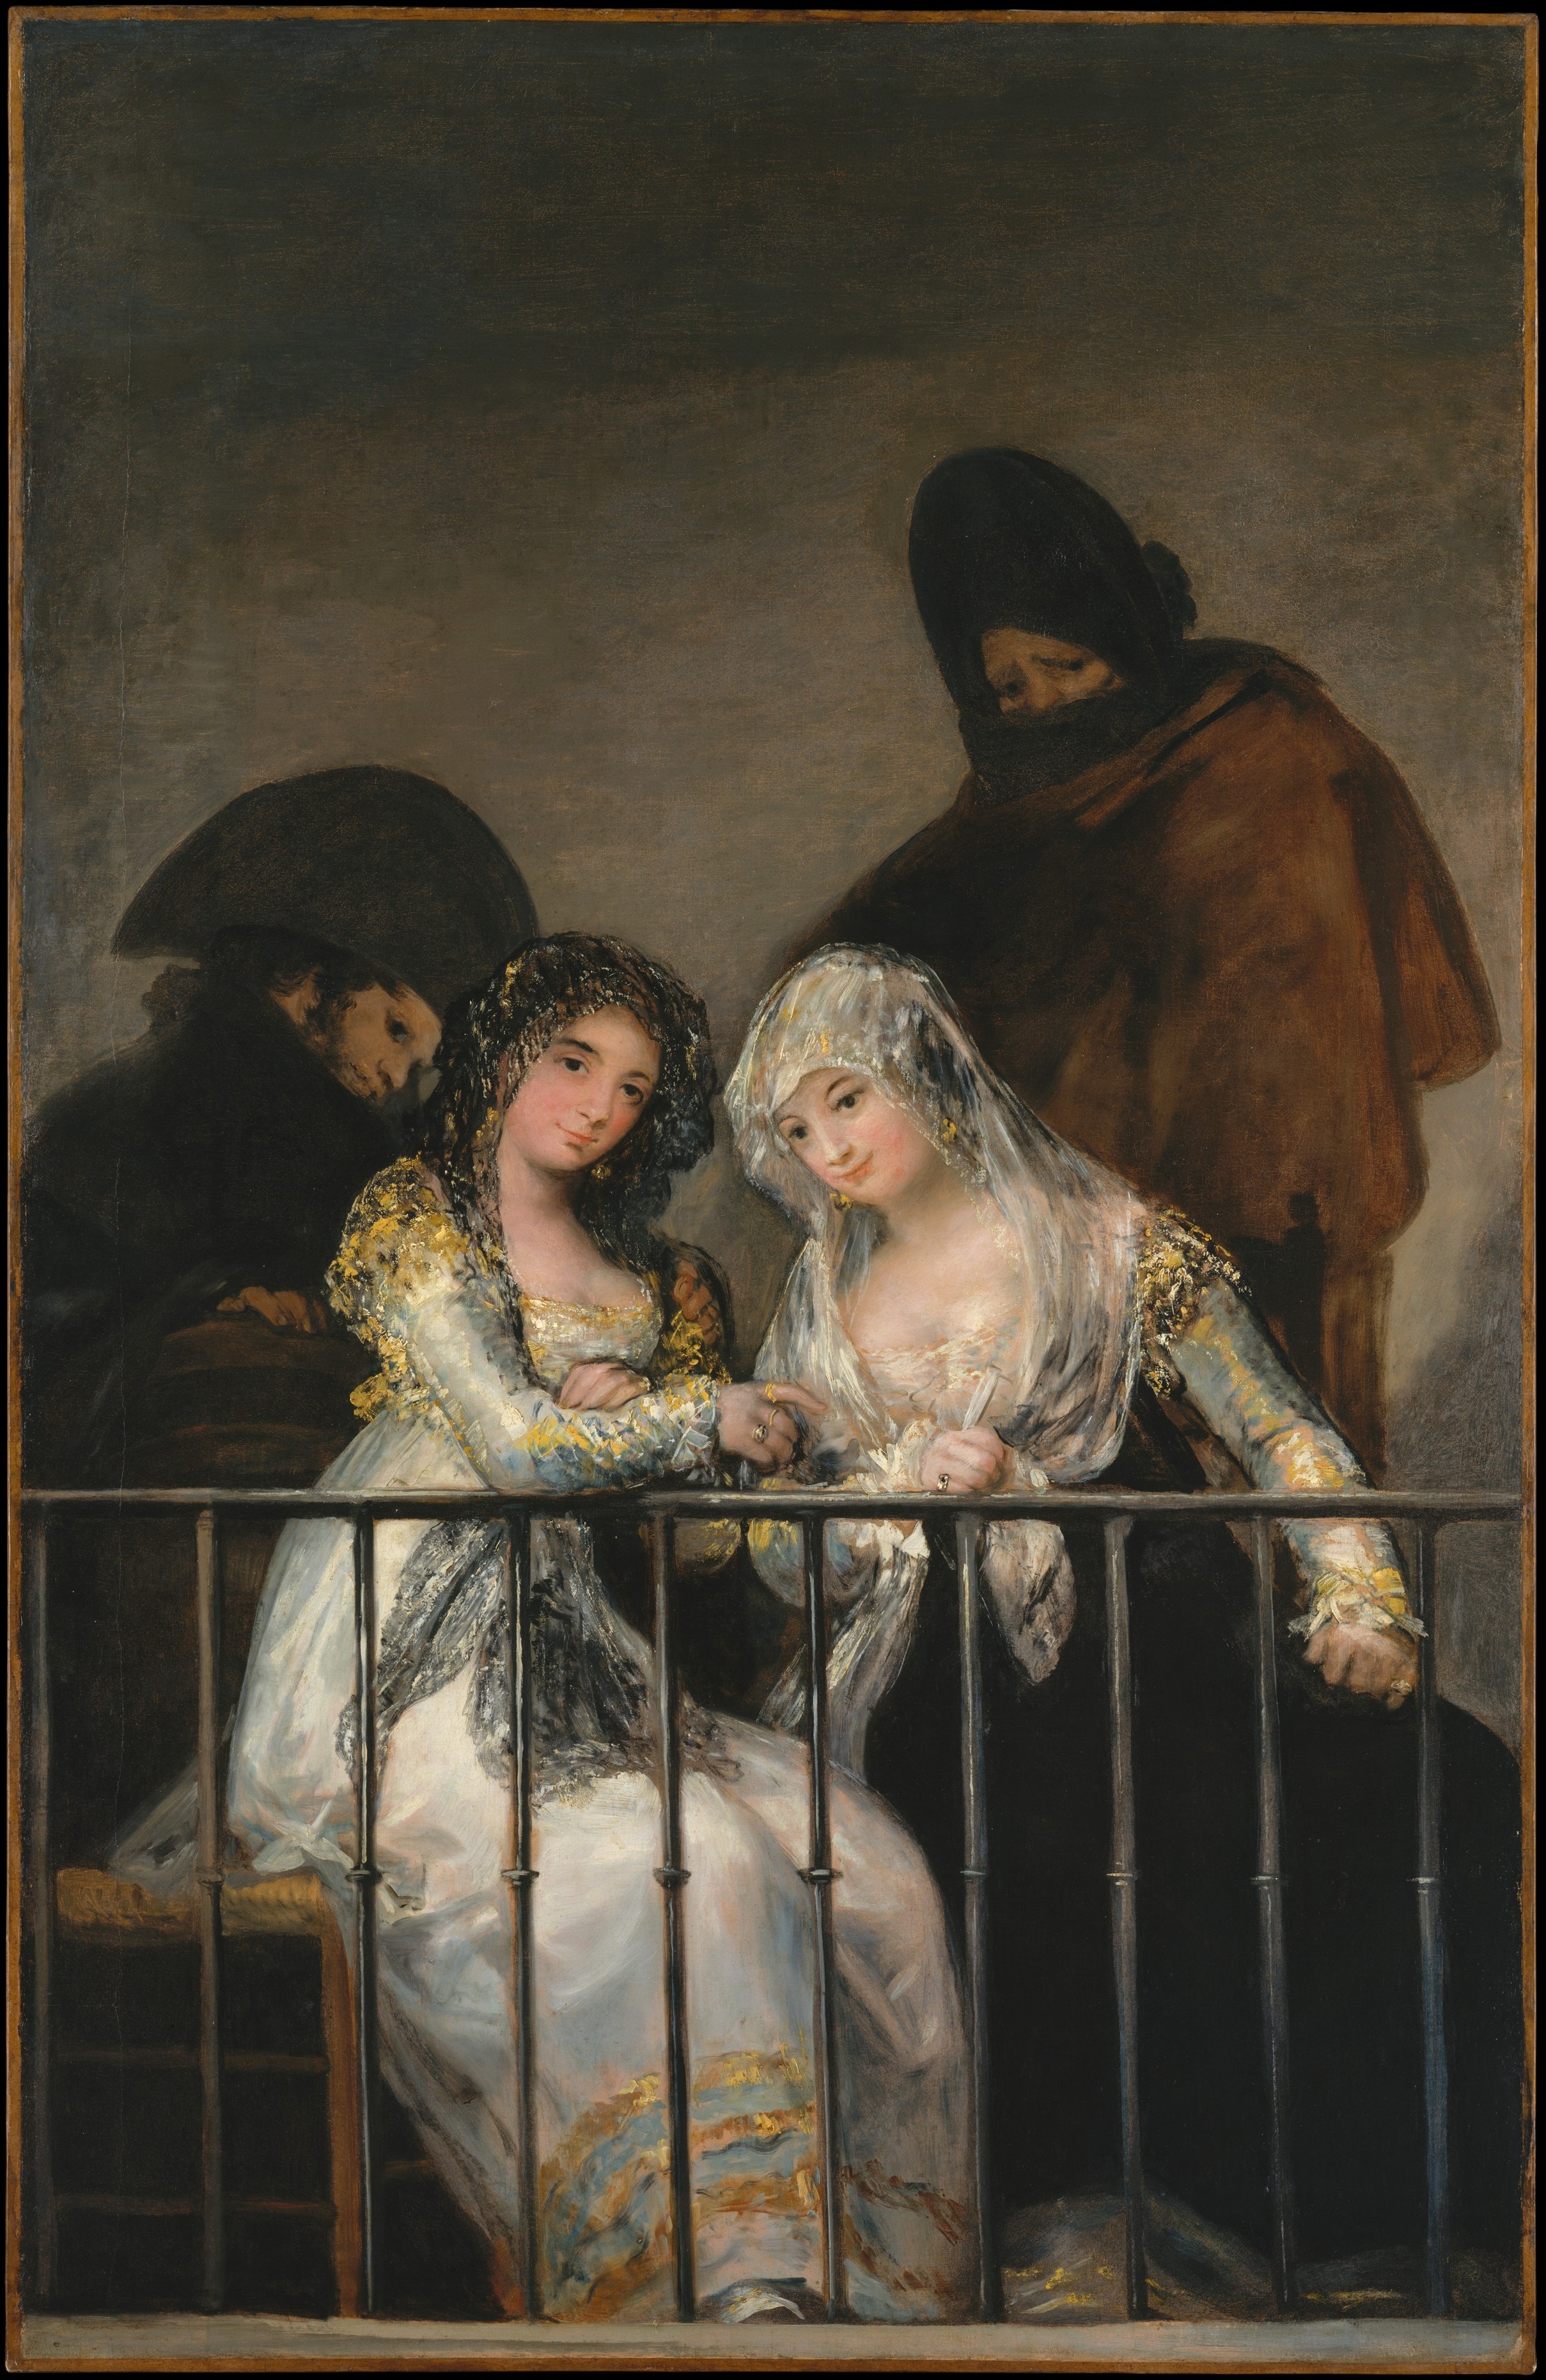 Majas on a Balcony by Francisco Goya - c. 1808-1812 - 162 × 107 cm private collection